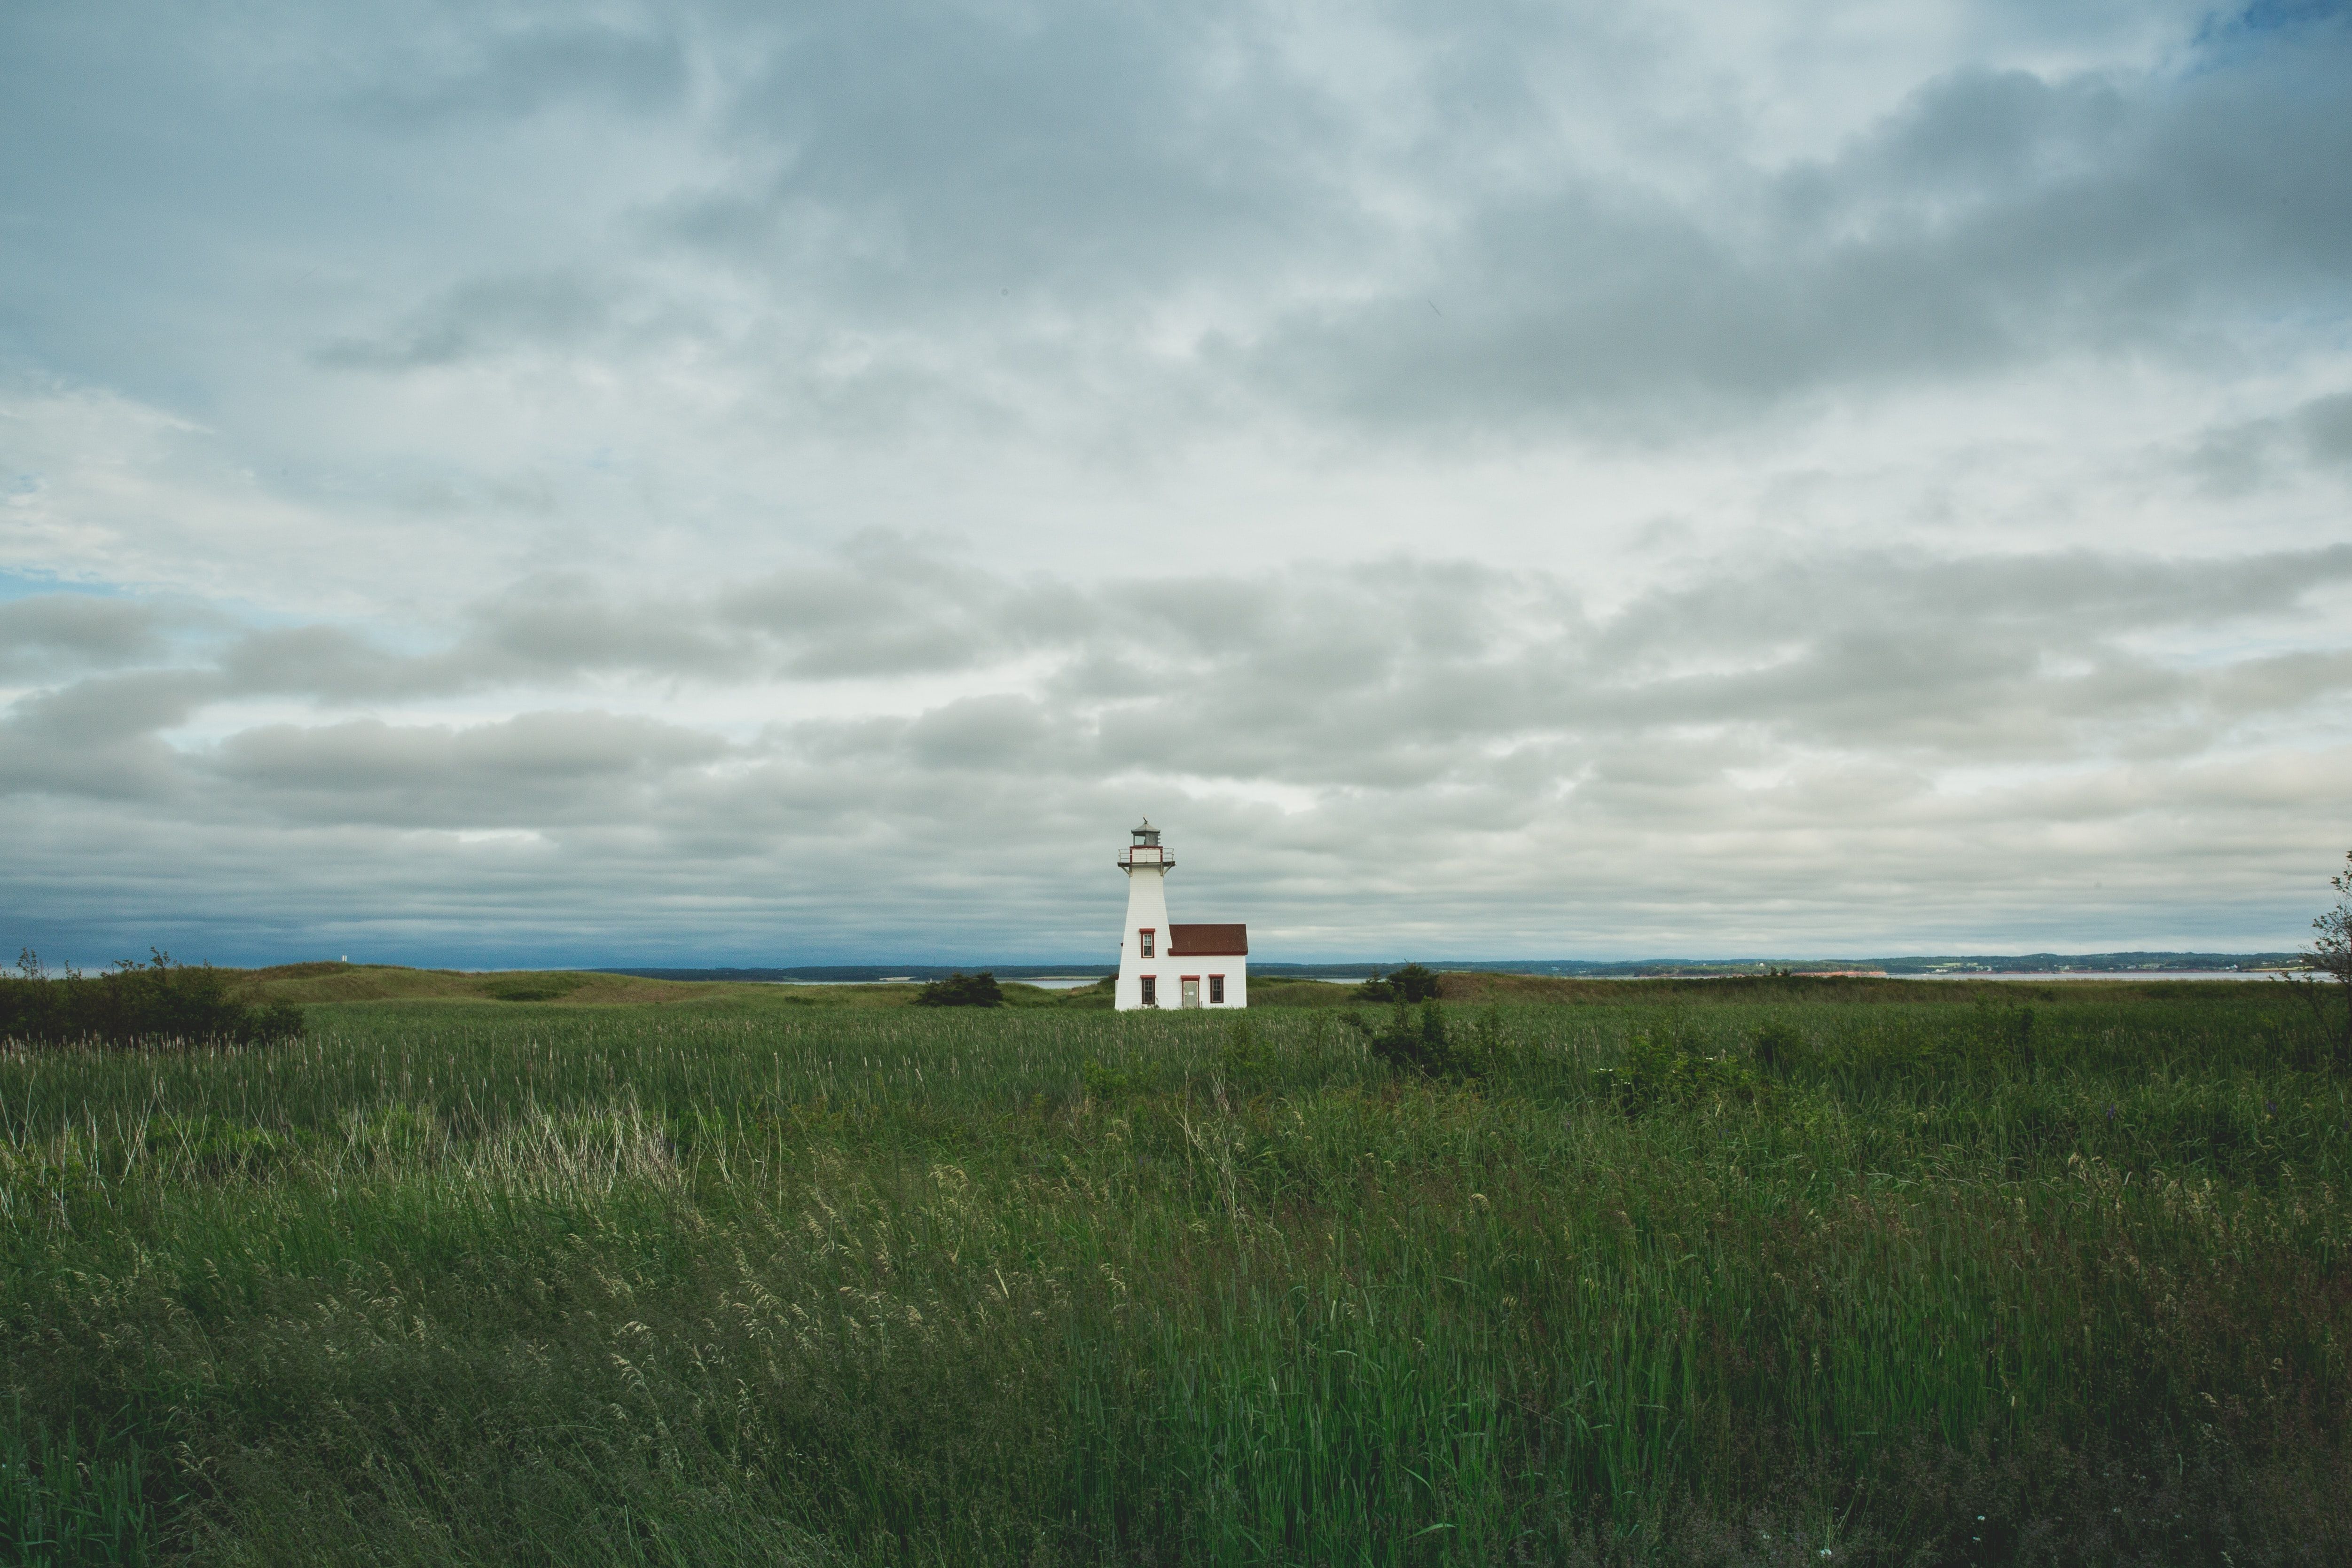 Prince Edward Island Picture. Download Free Image